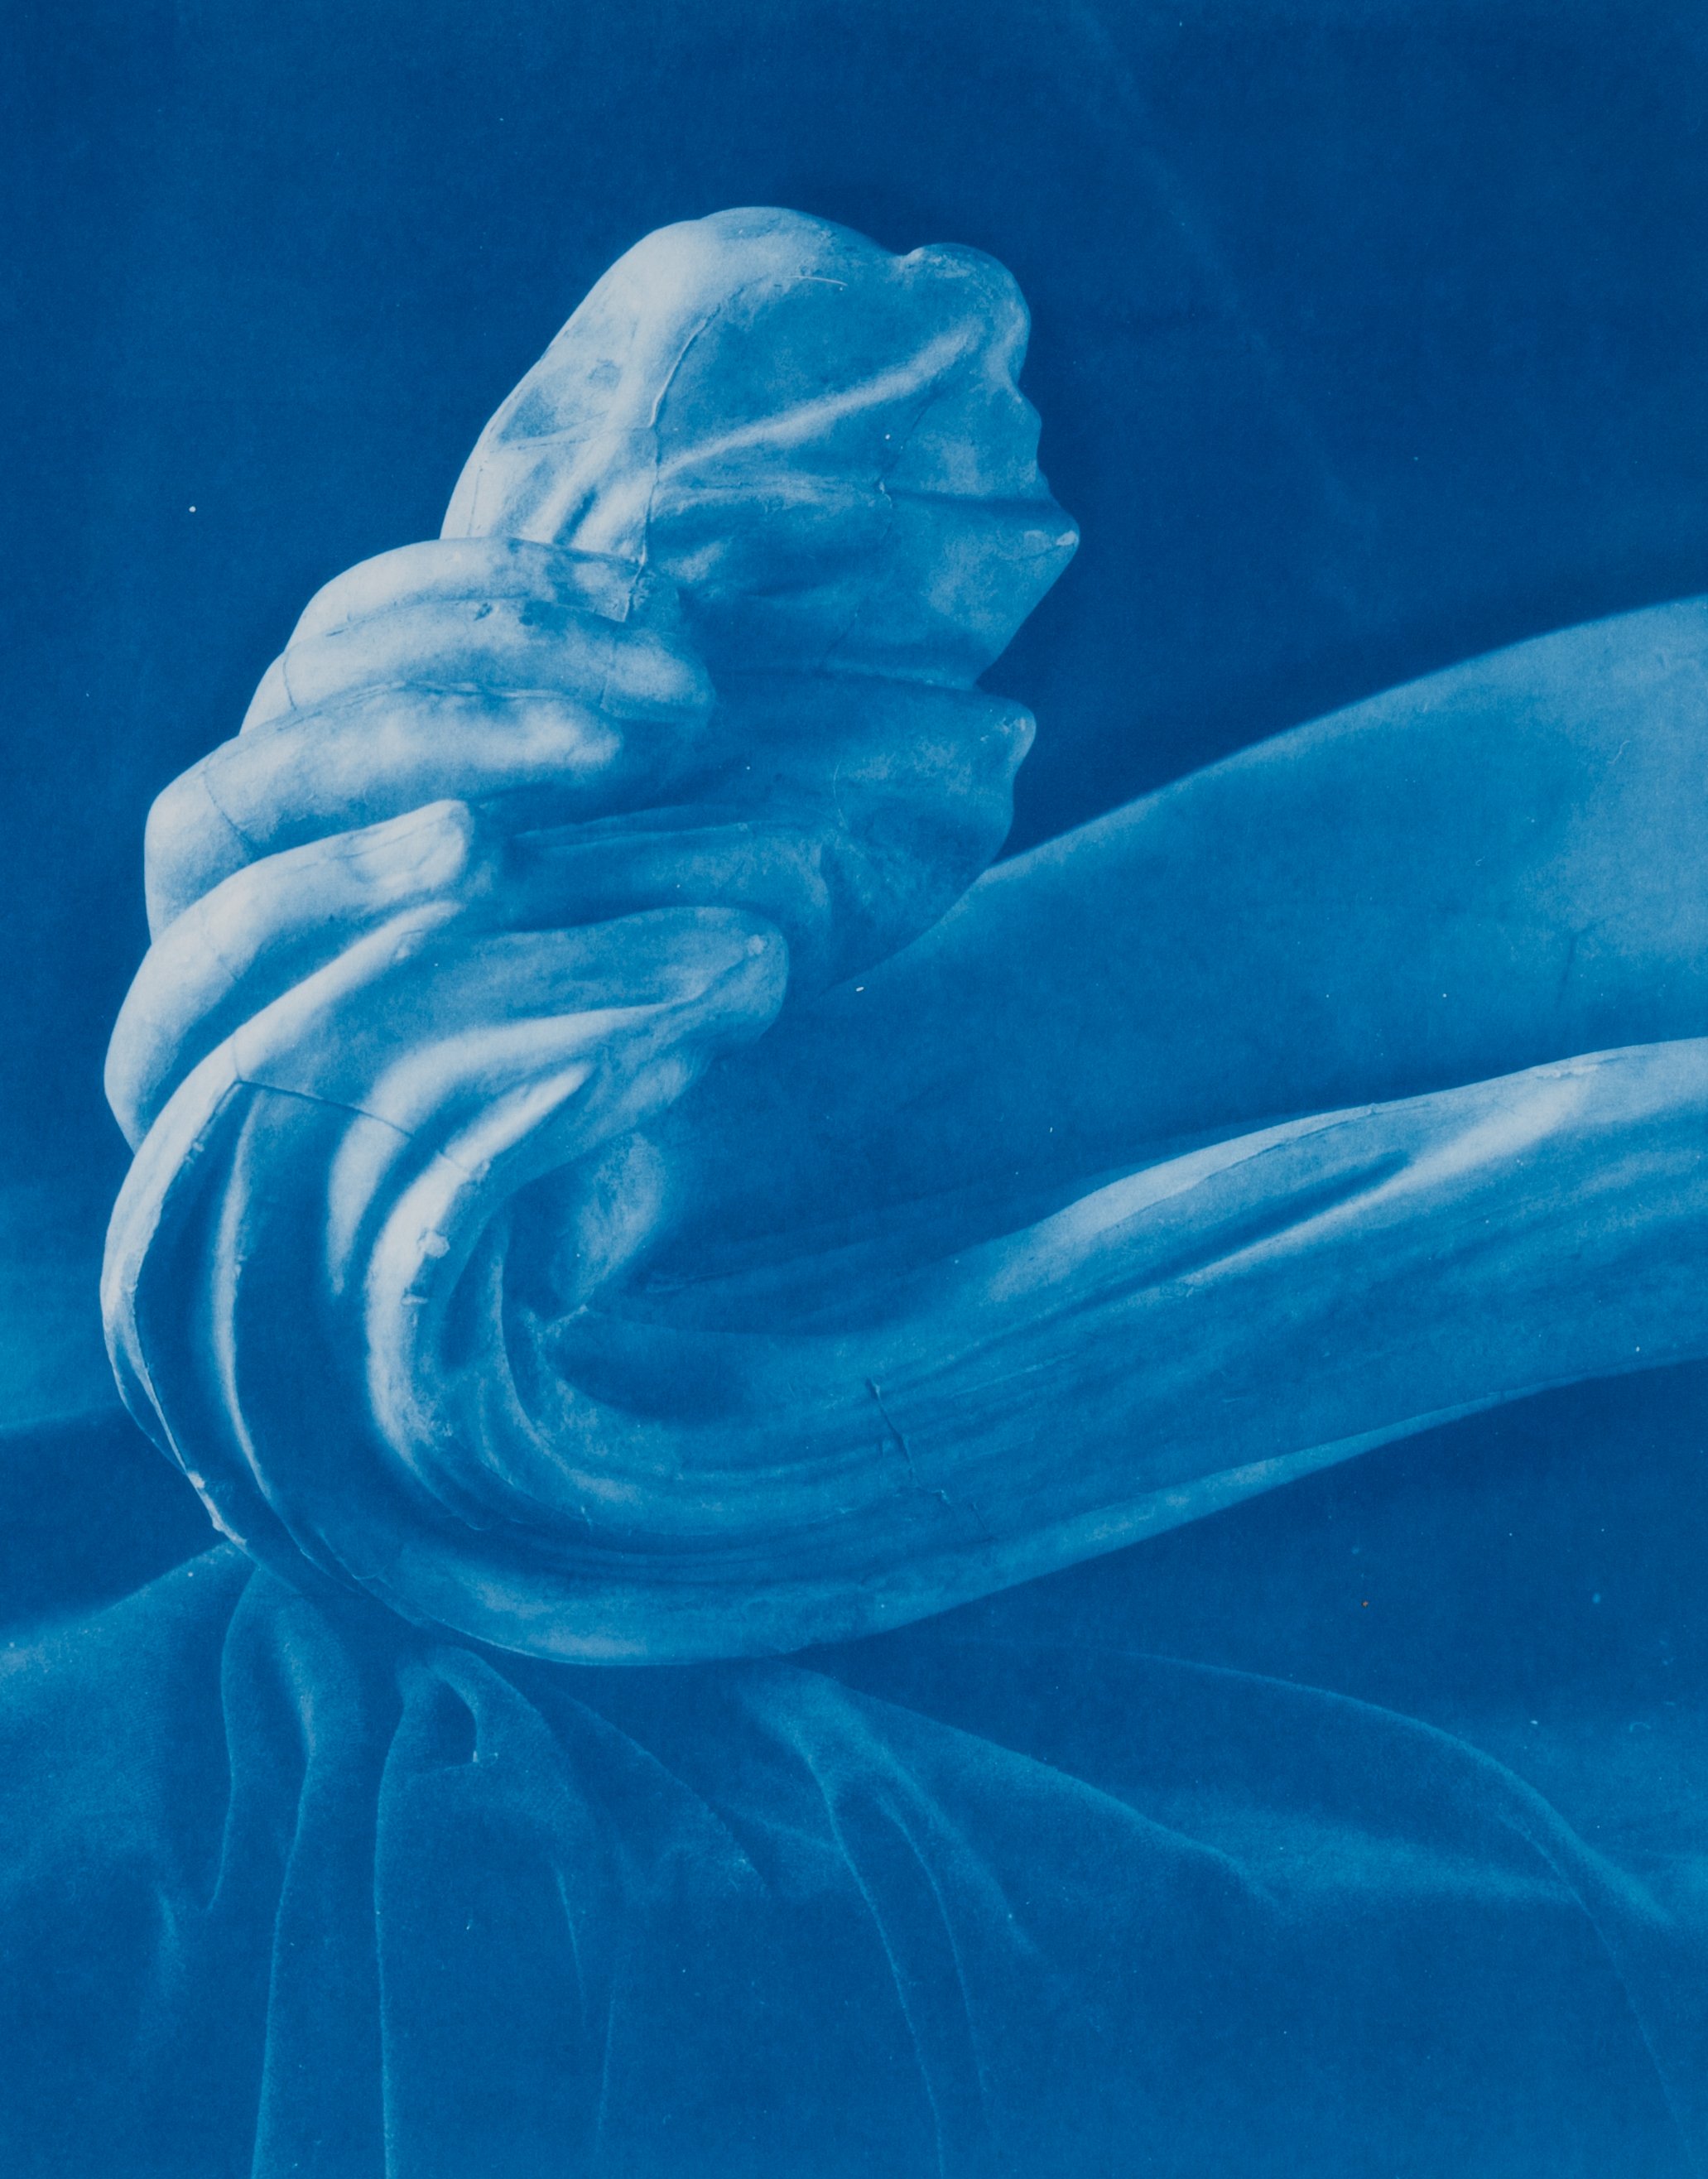    Fragment IV  , 2019 cyanotype 14.5 x 11.5 inches 